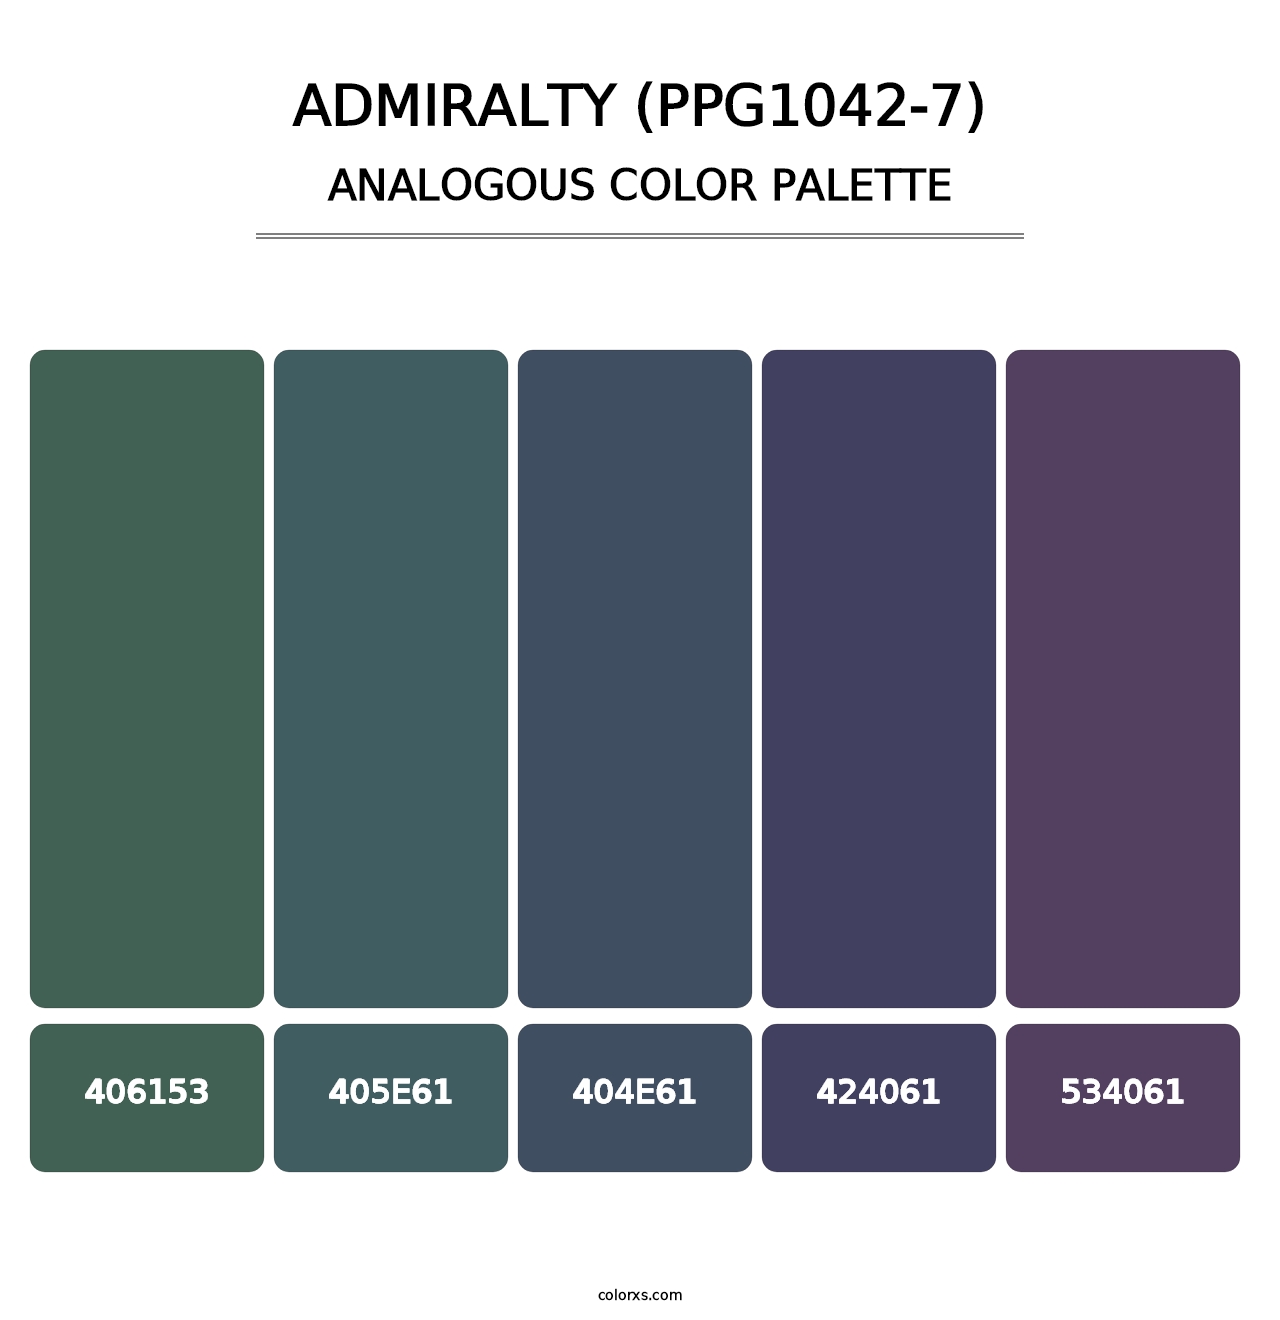 Admiralty (PPG1042-7) - Analogous Color Palette